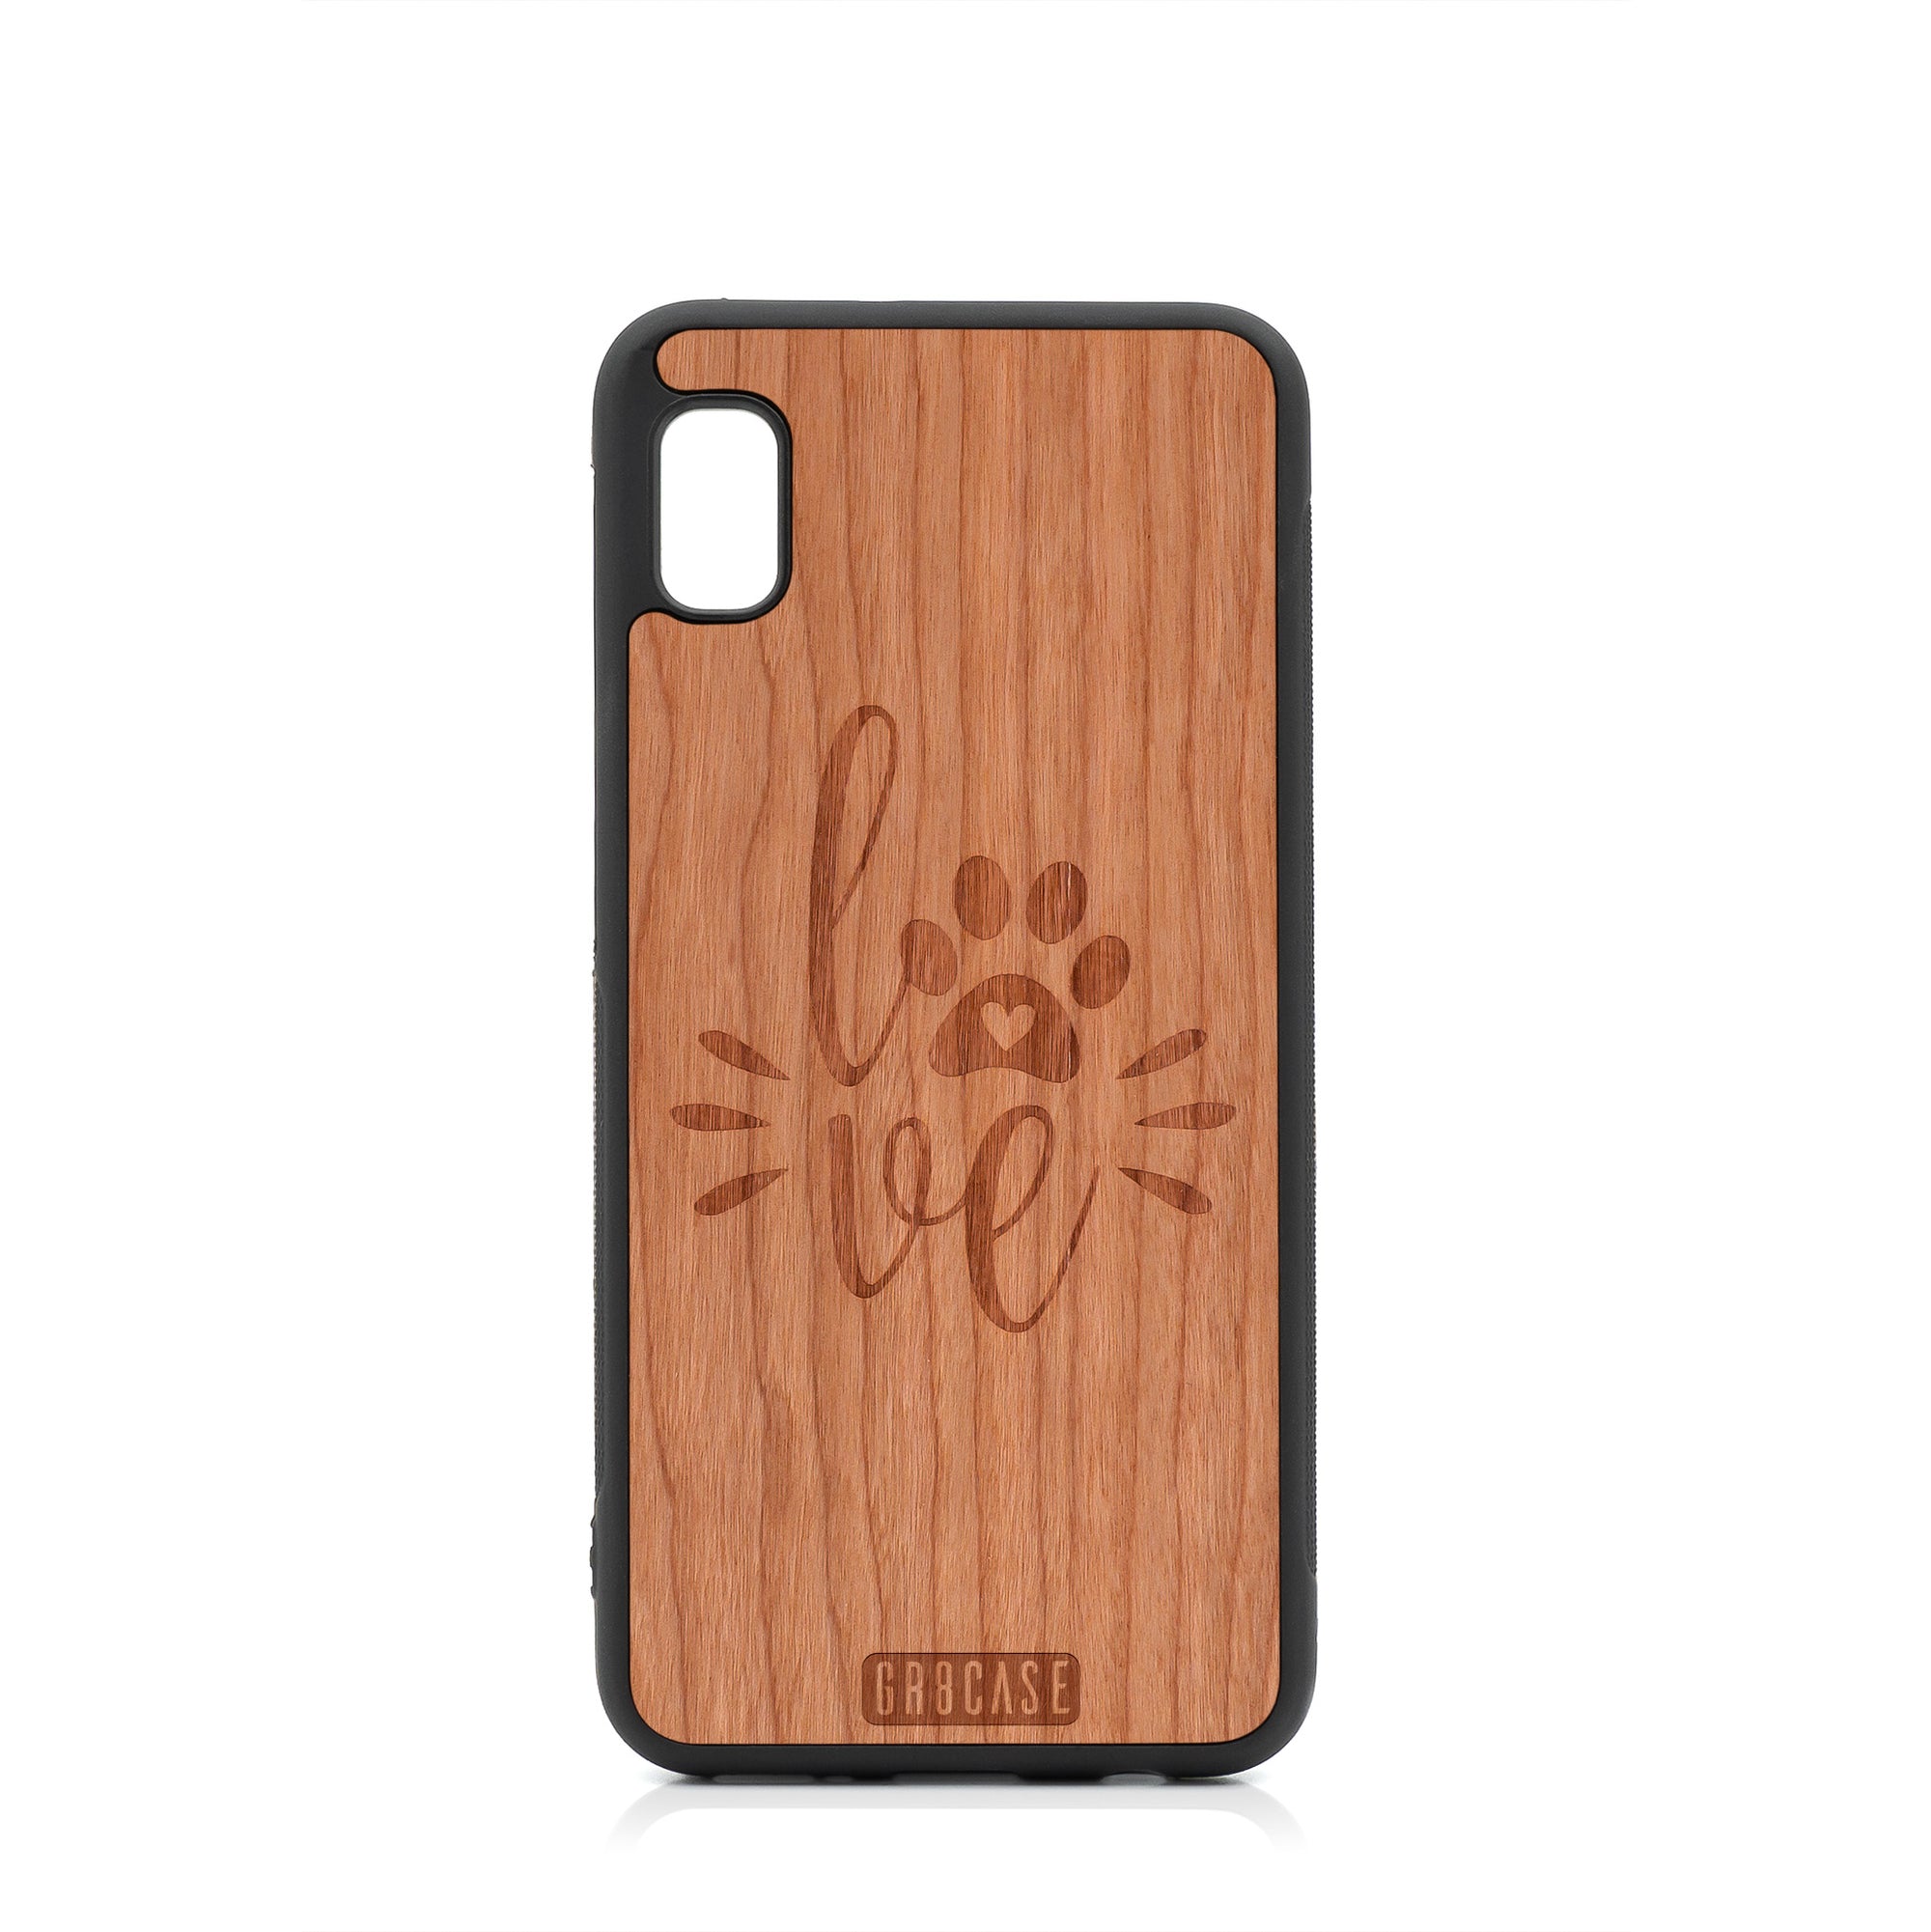 Paw Love Design Wood Case For Samsung Galaxy A10E by GR8CASE